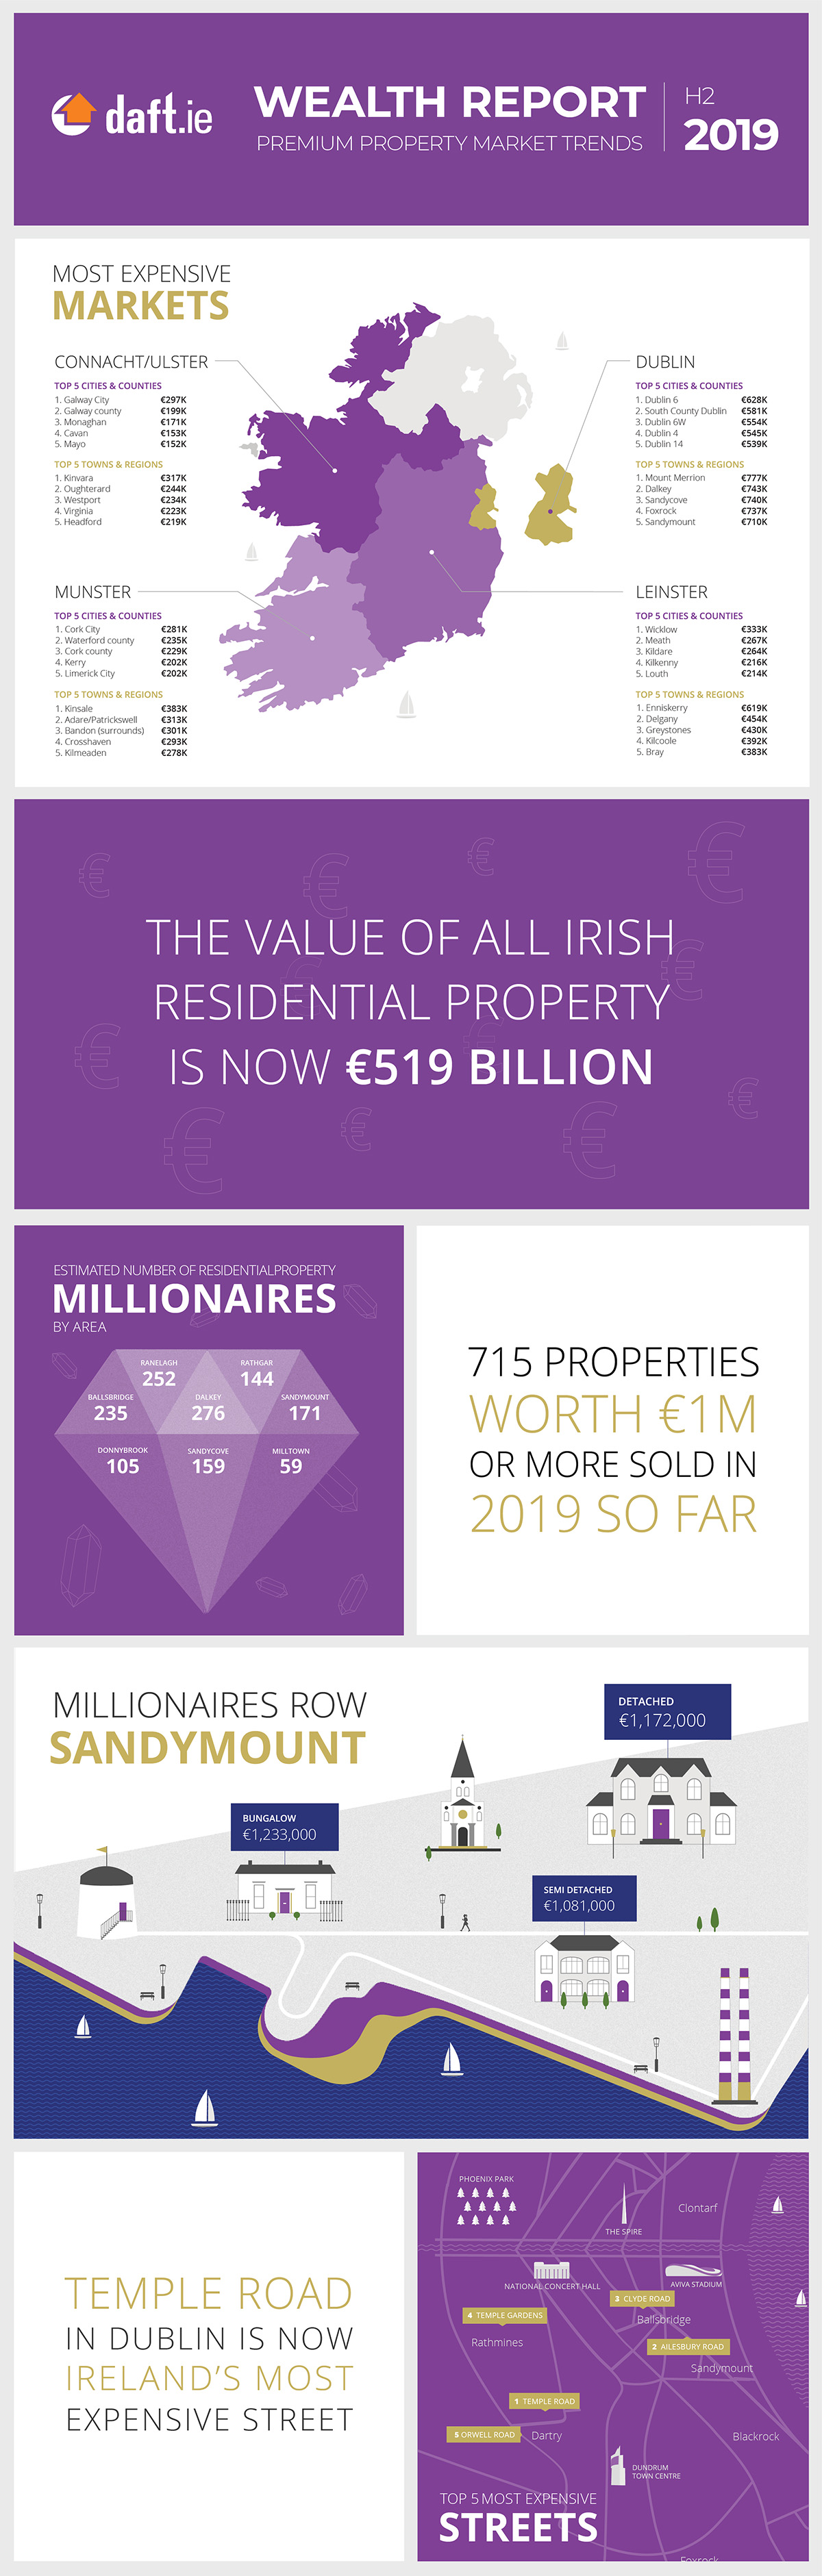 Daft.ie Wealth Report: H2 2019 Infographic